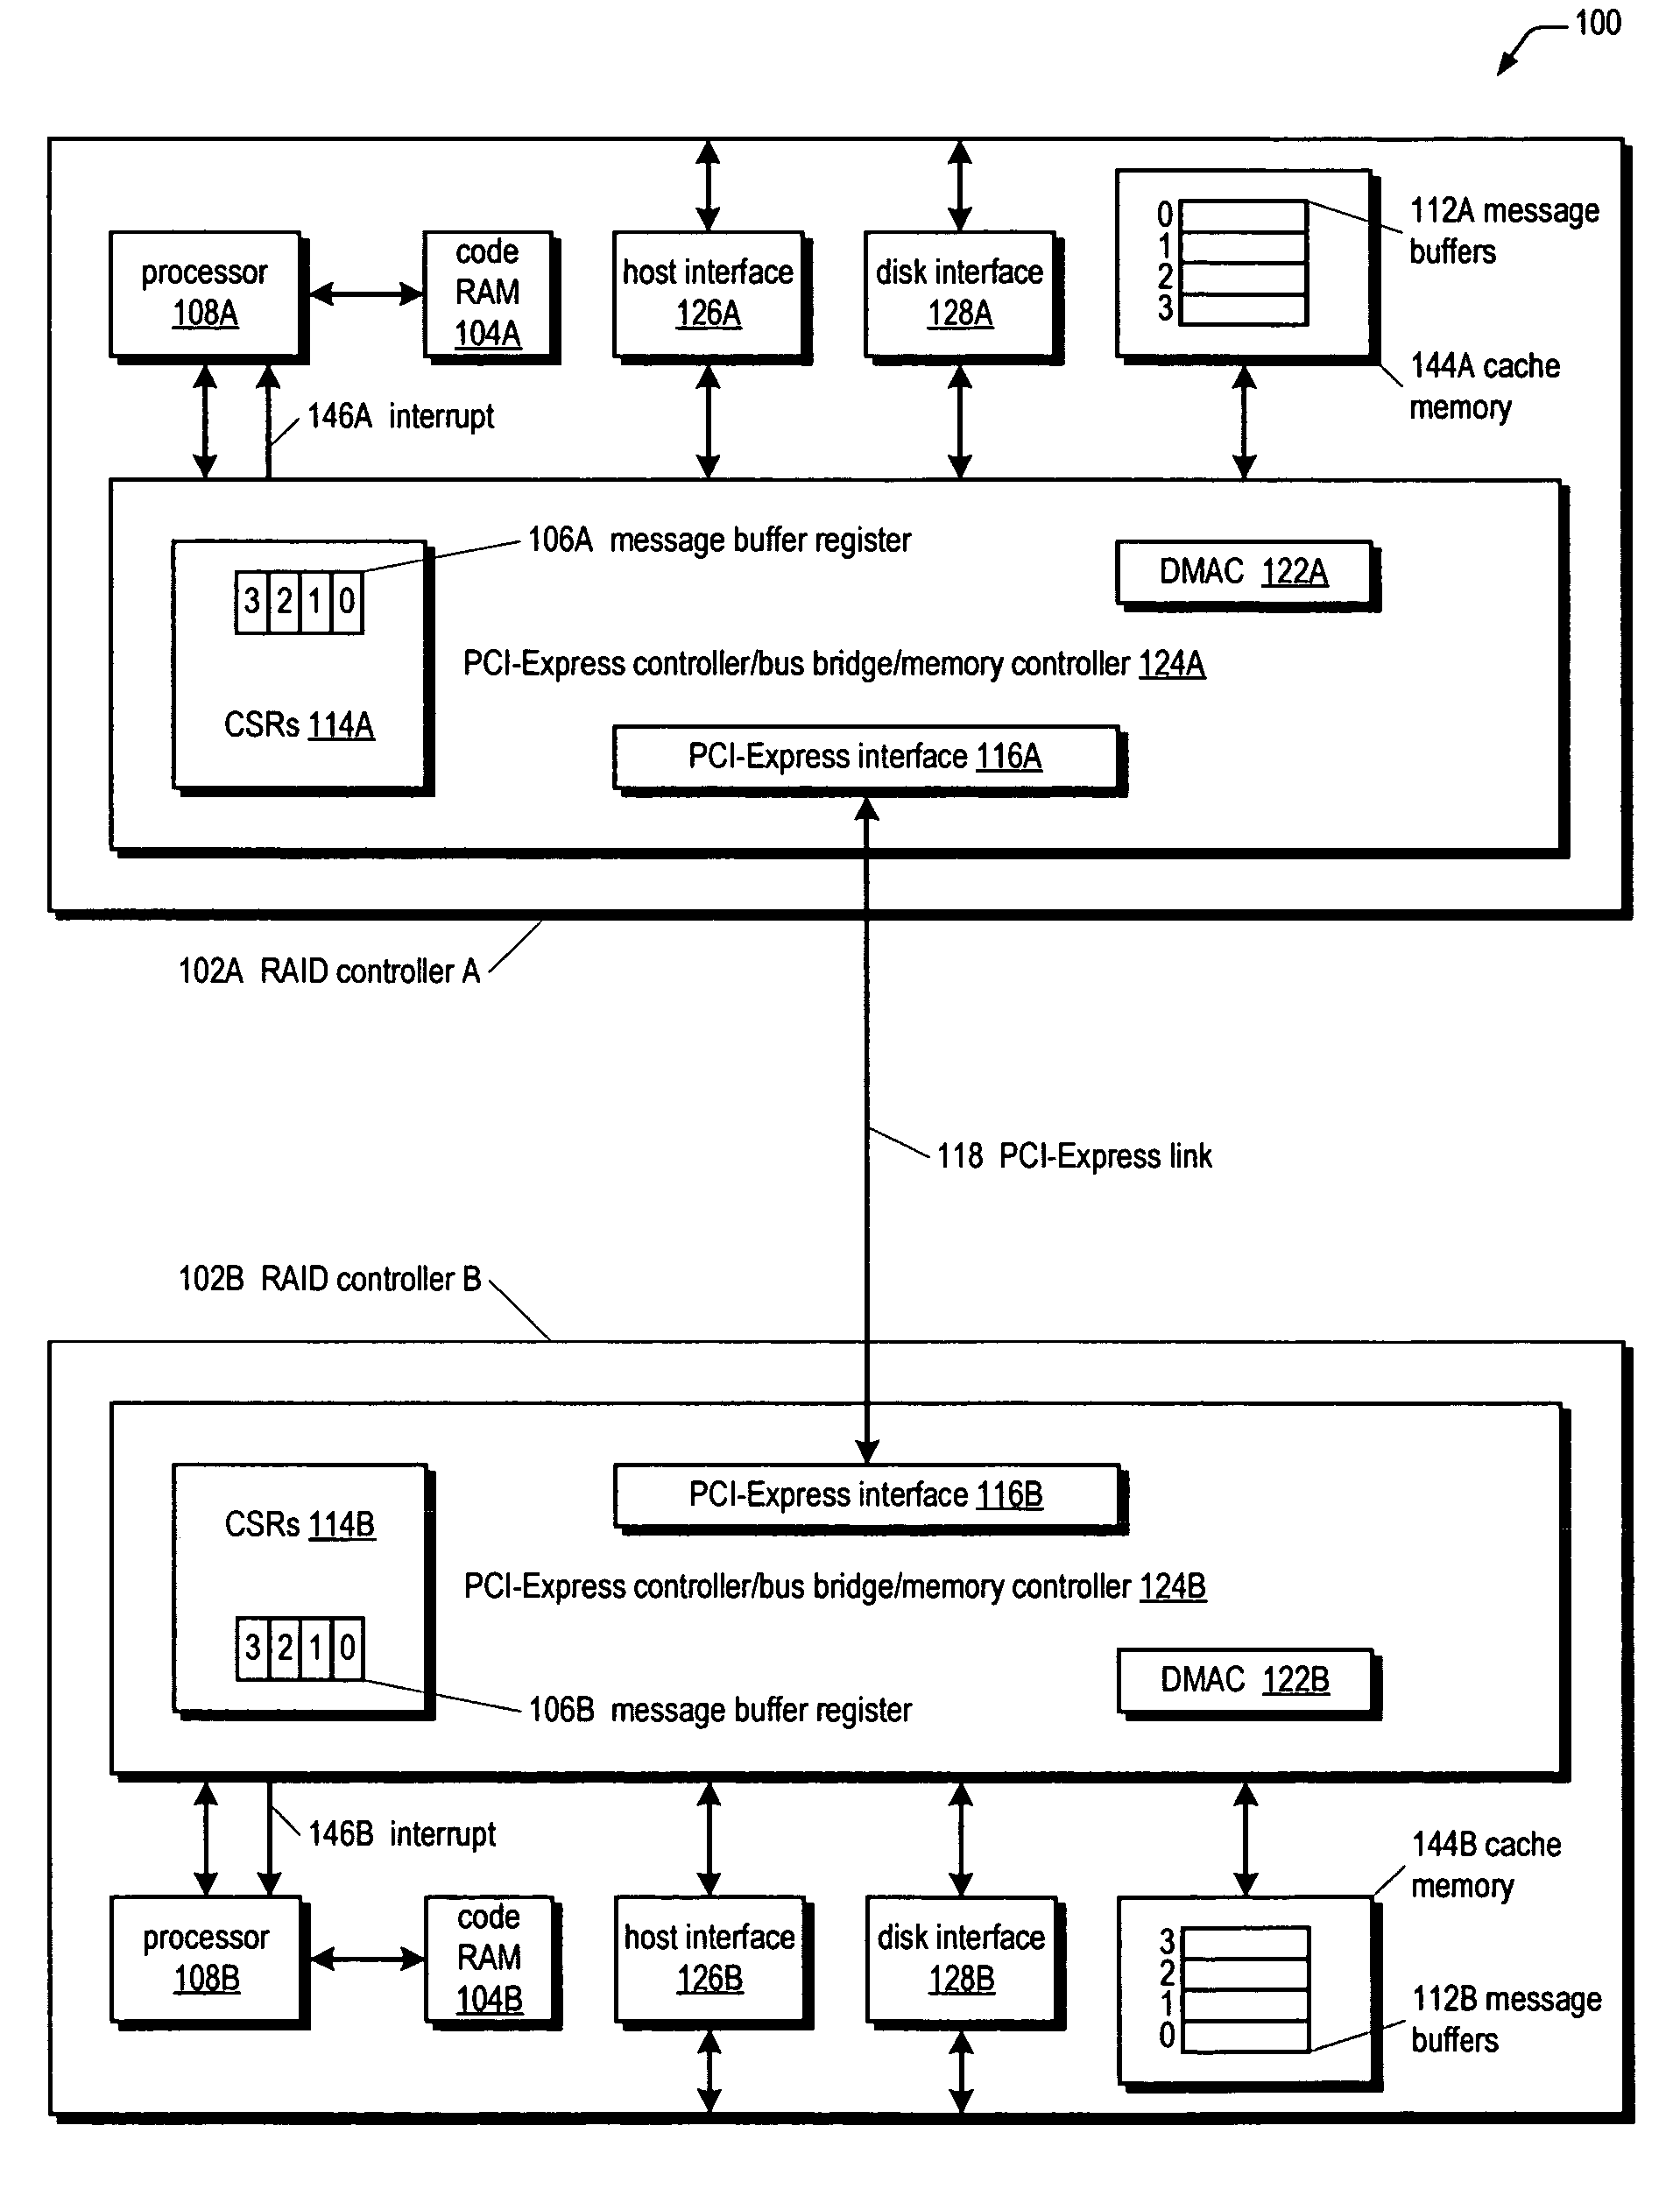 Method for efficient inter-processor communication in an active-active RAID system using PCI-express links